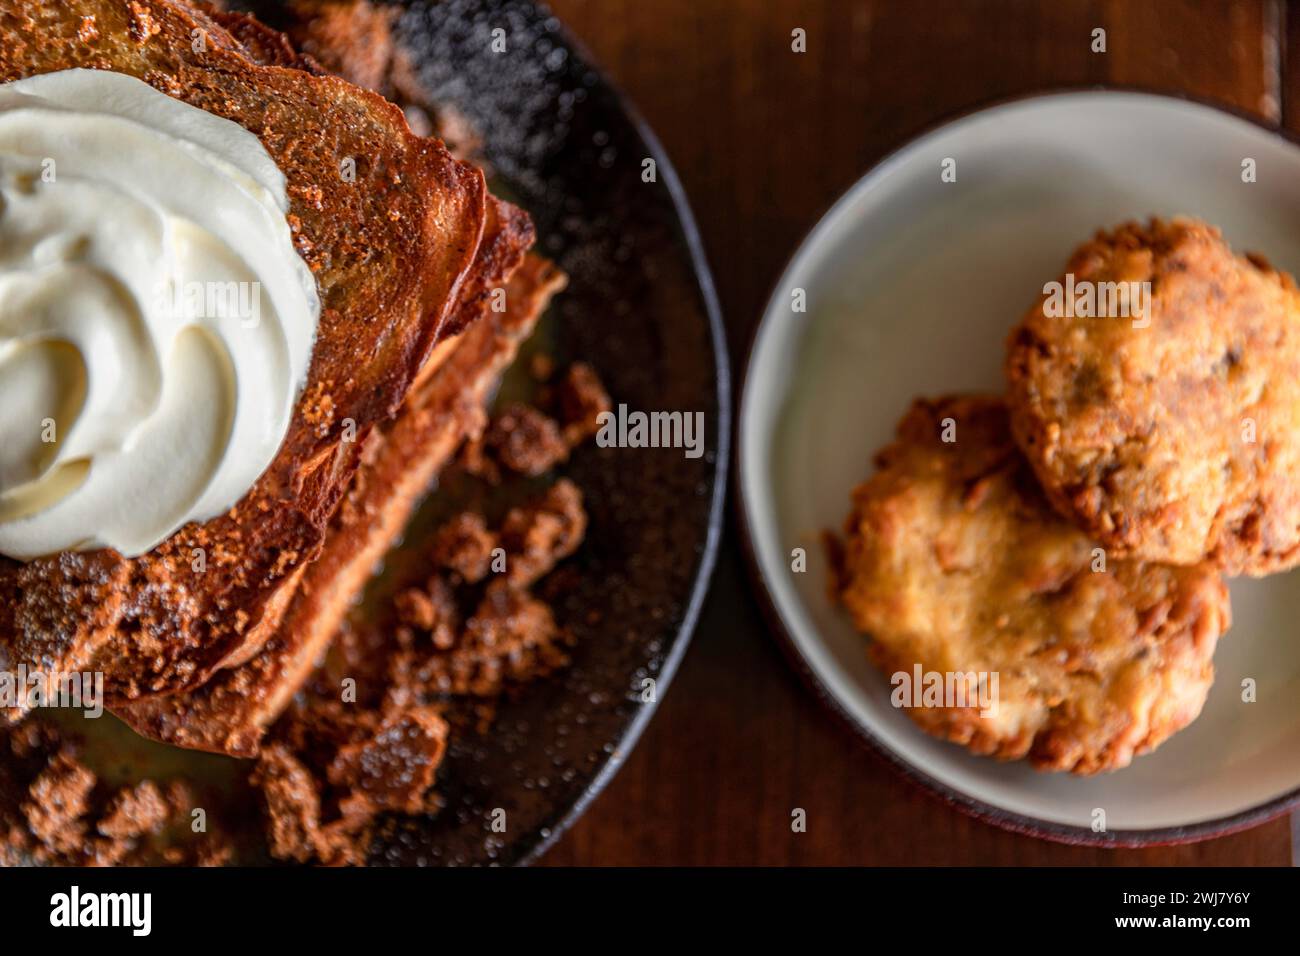 Delicious assortment of dishes, featuring French toast, a mouthwatering cheeseburger, and luscious cream frosting Stock Photo